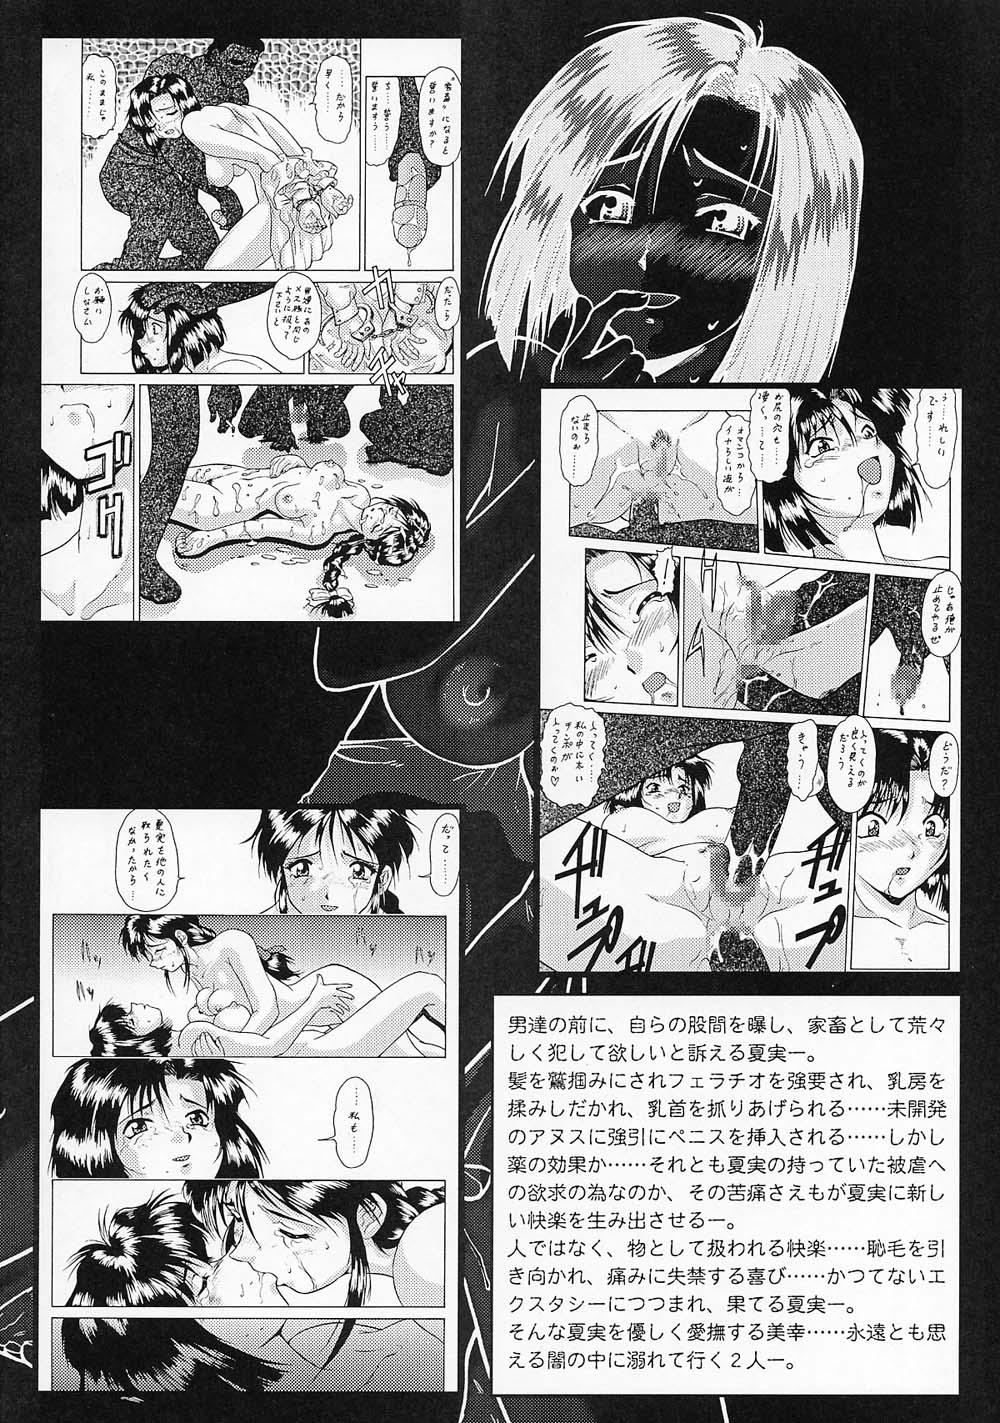 Longhair Taiho Shichauzo The Doujin Vol. 3 - Youre under arrest Step Dad - Page 8